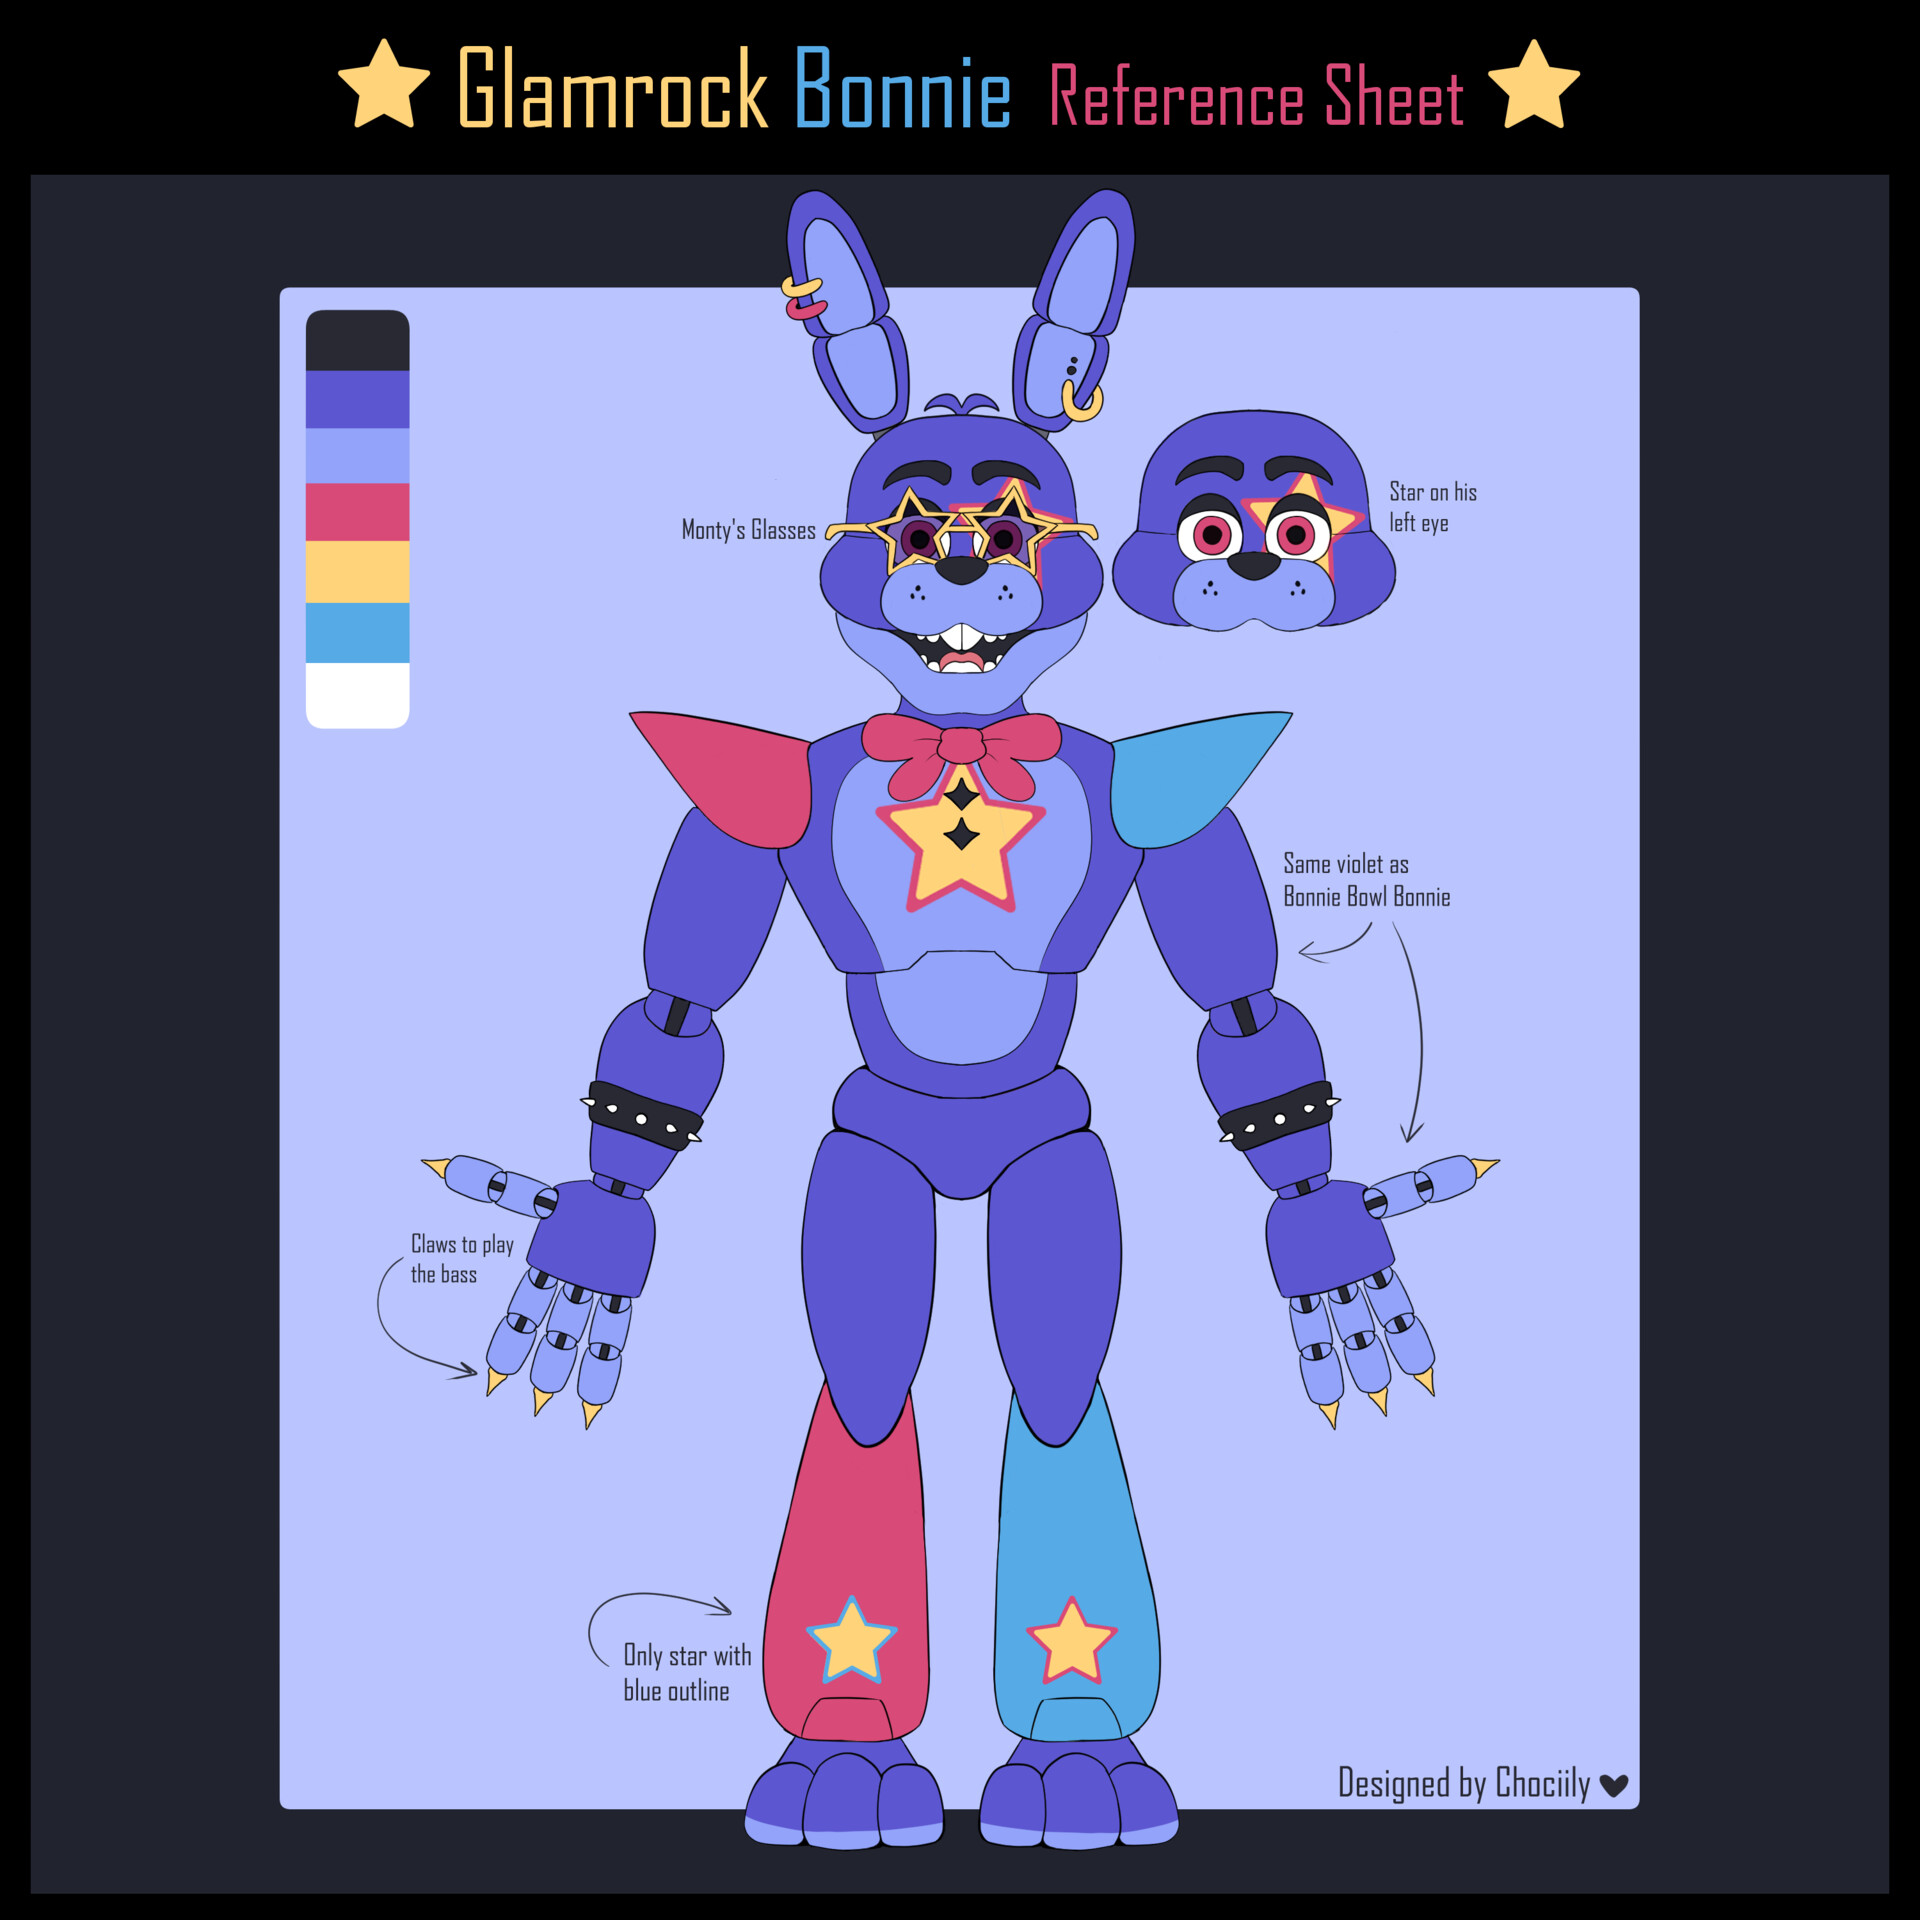 HOW TO DRAW GLAMROCK BONNIE, FIVE NIGHT AT FREDDY'S, SECURITY BREACH